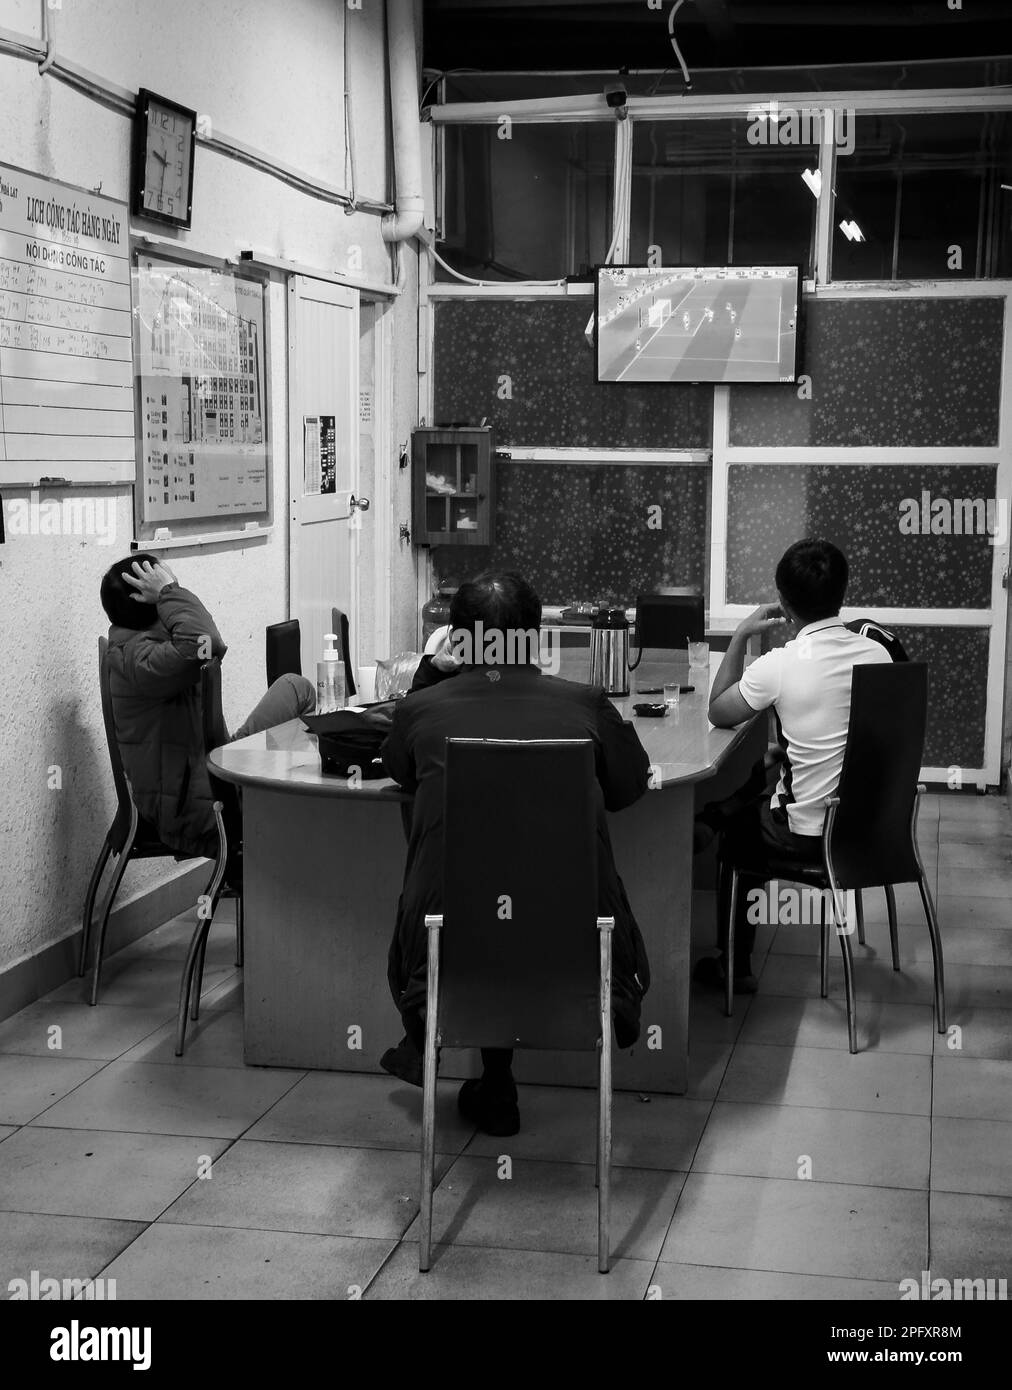 Three security guards at Dalat Market in Vietnam sit to watch a football (soccer) match on television taking place at the FIFA World Cup 2022. Stock Photo